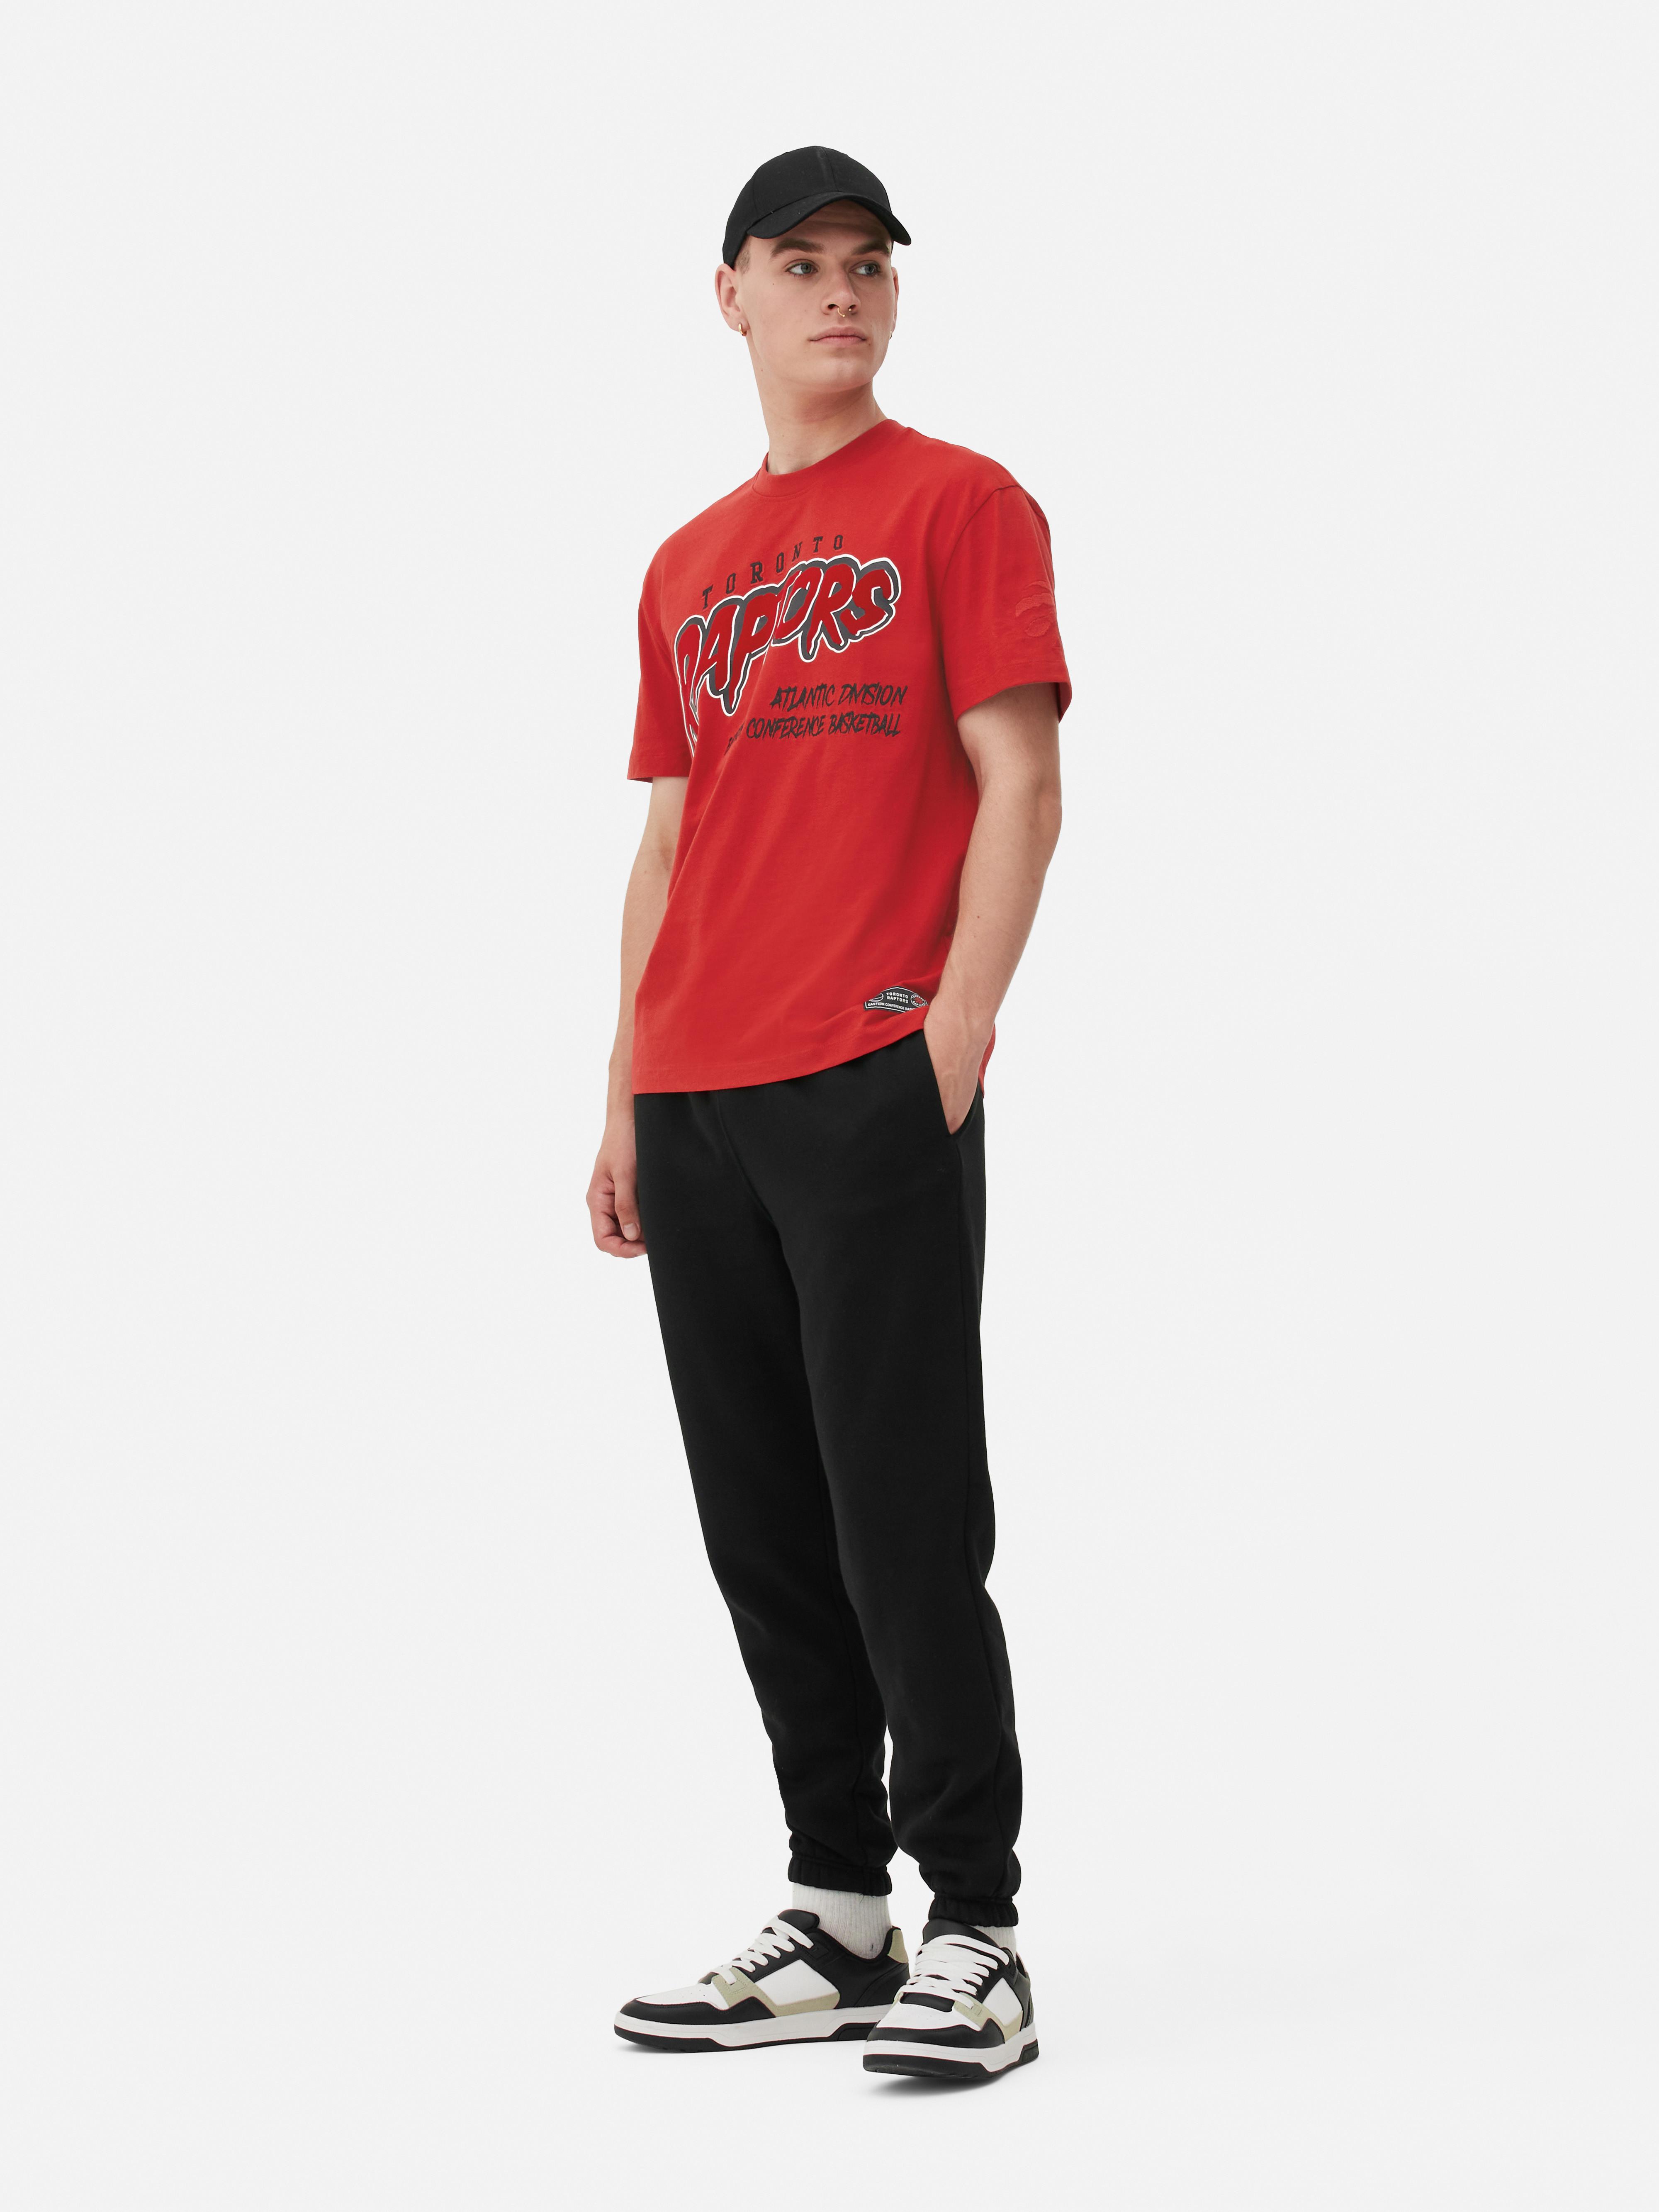 Our Latest NBA Loungewear Collection, Primark